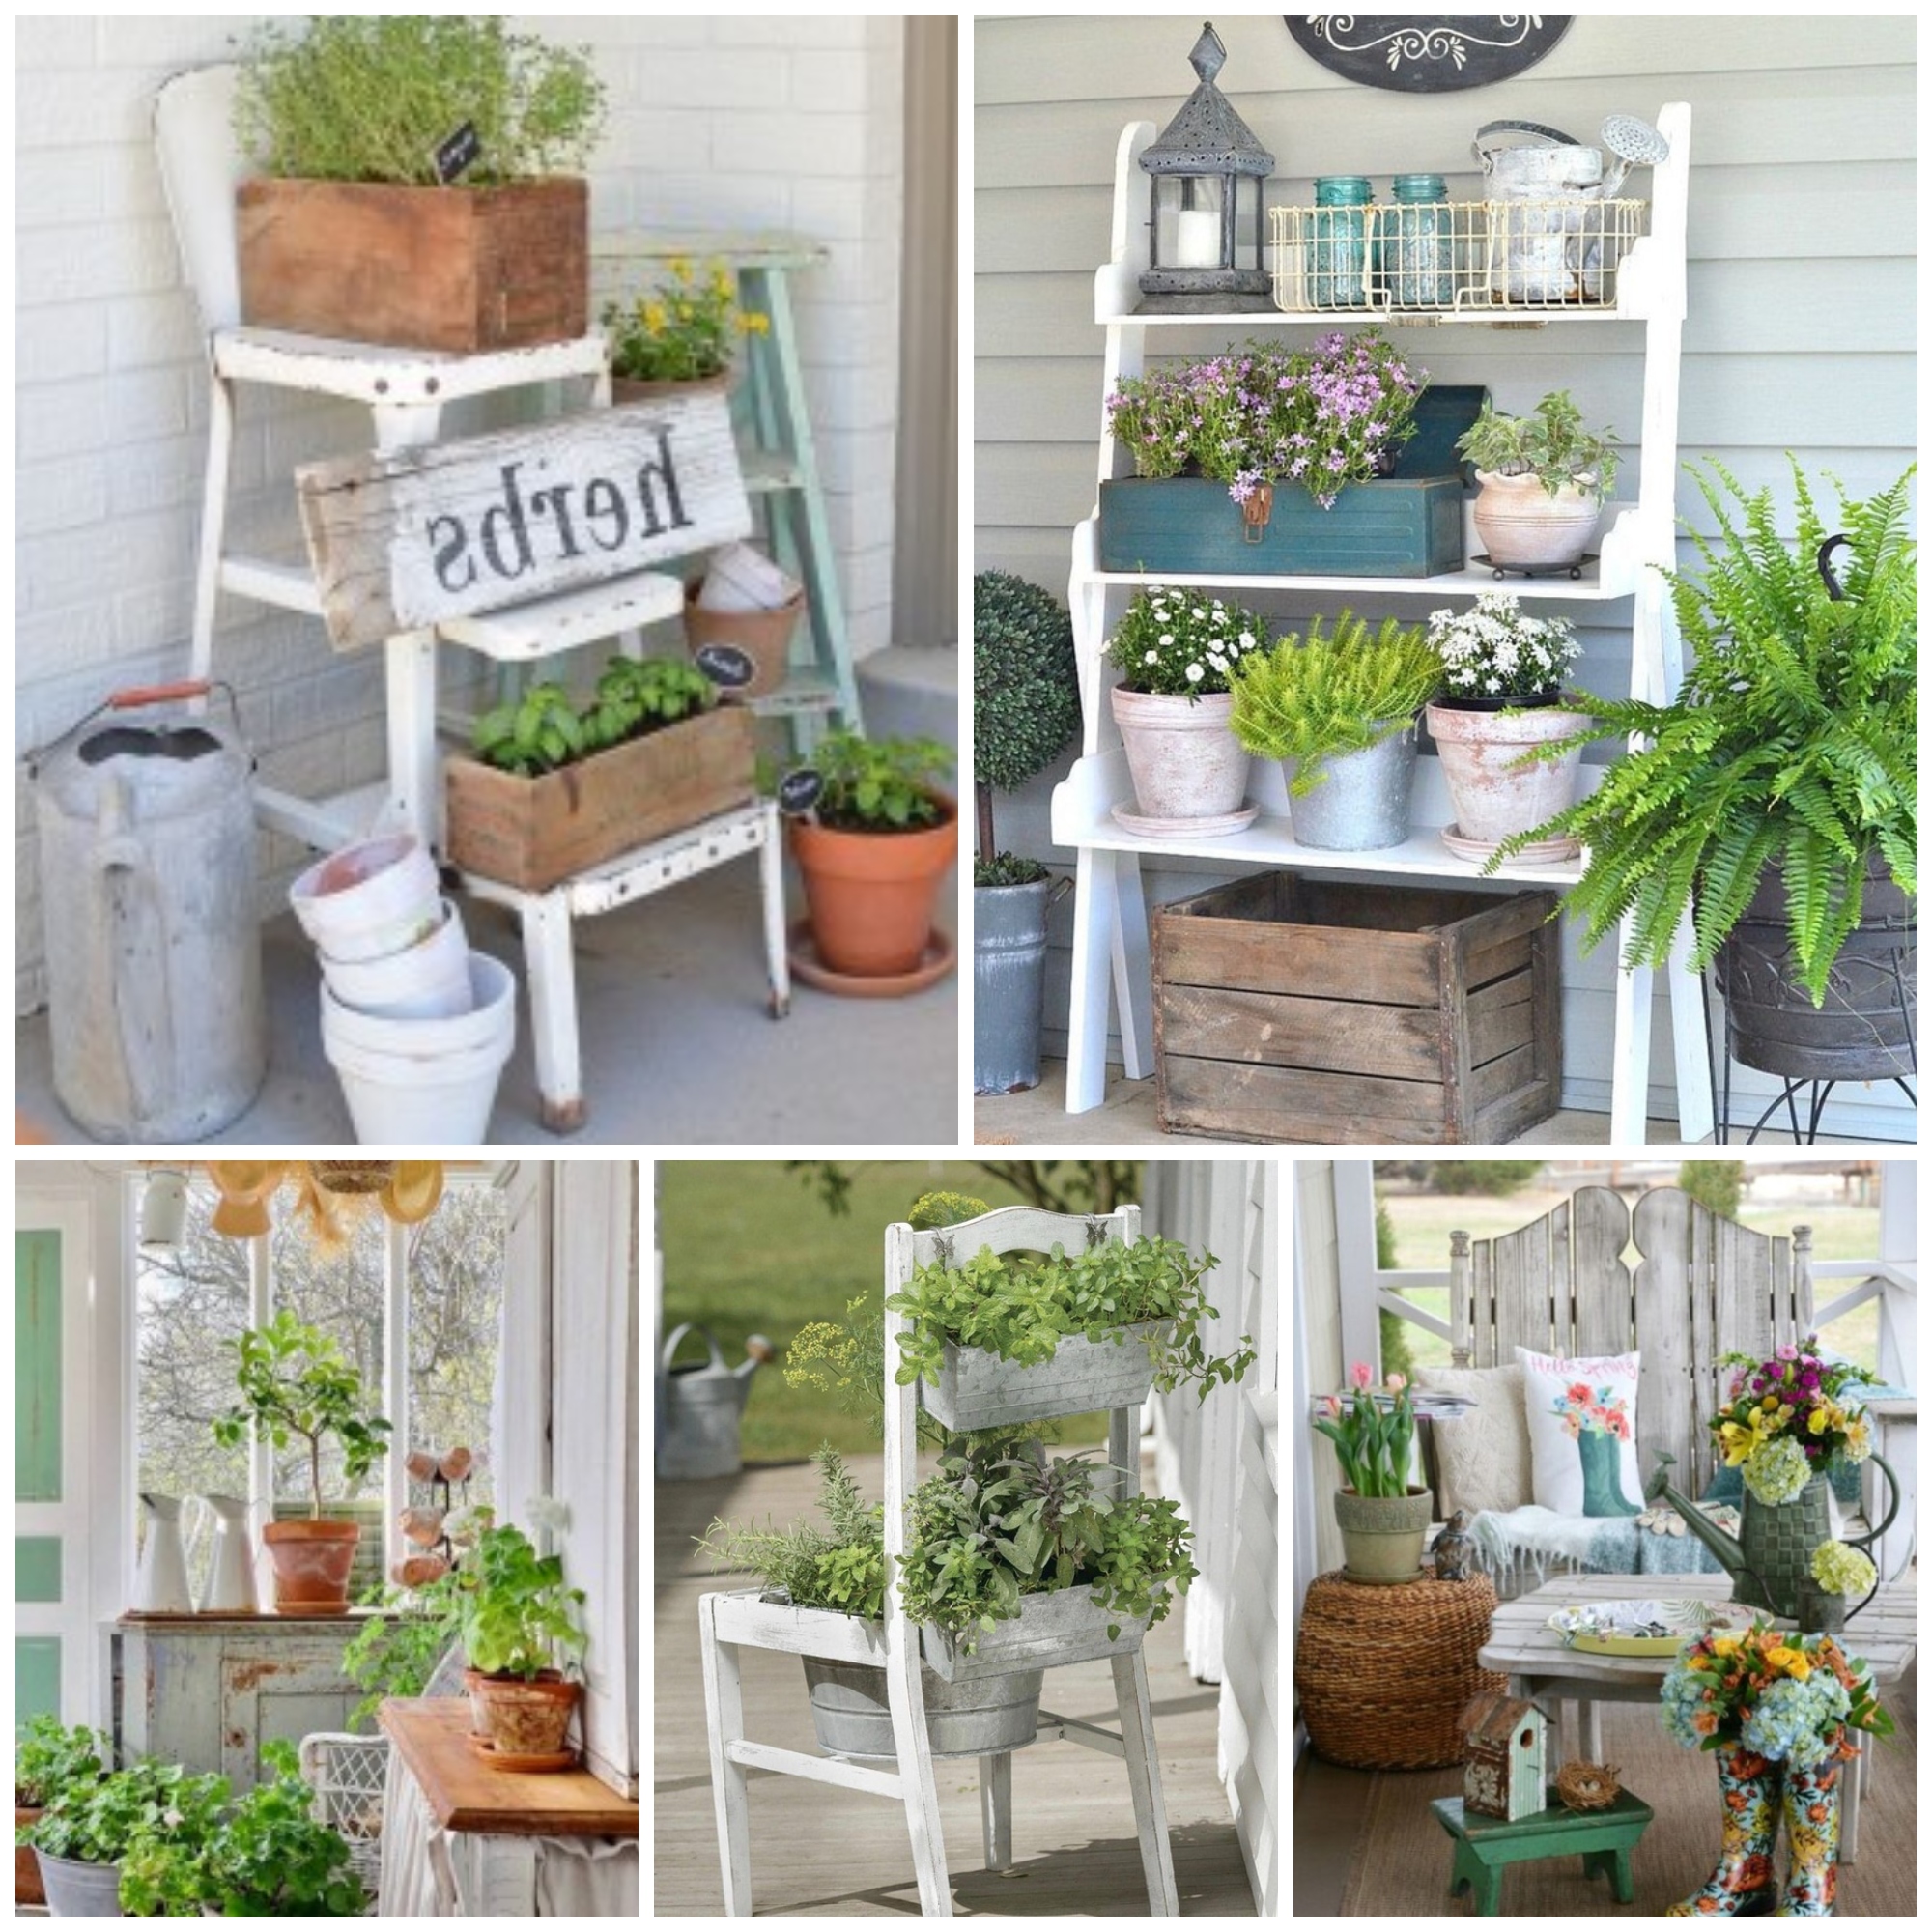 Easy and Inexpensive Ways to Add Spring Vintage Decor